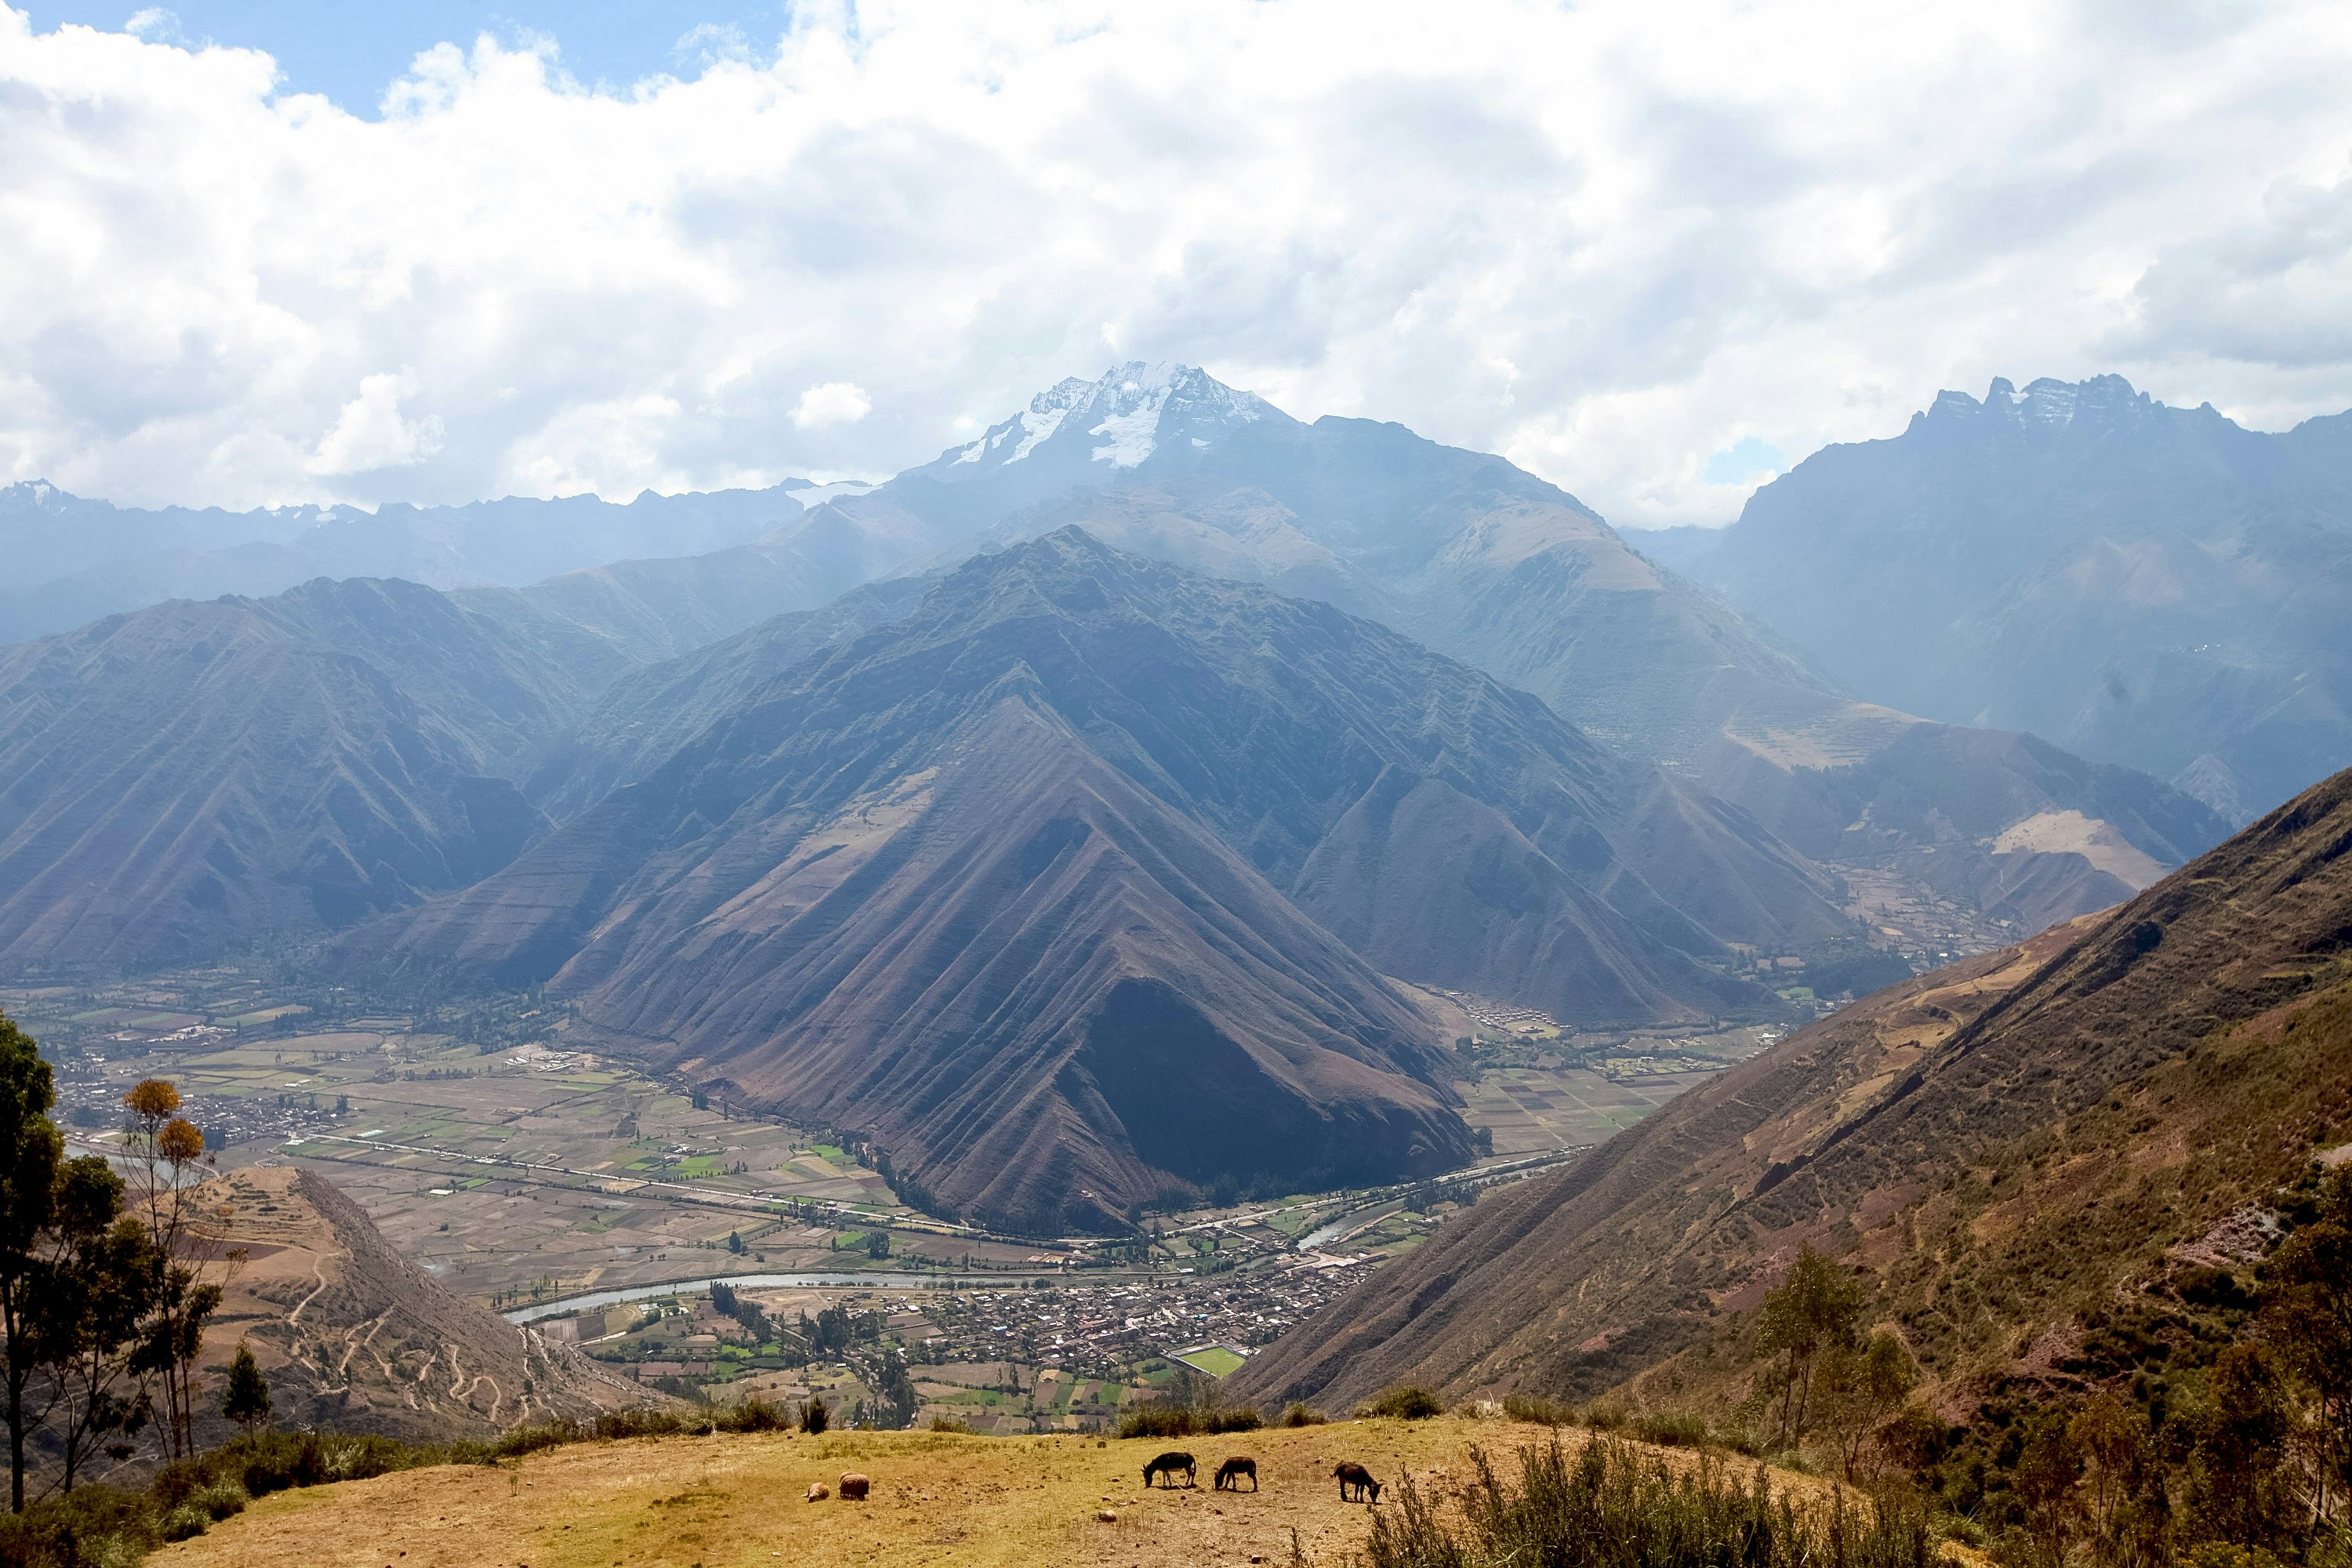 A to Z: Everything You Need to Know About Traveling to Peru